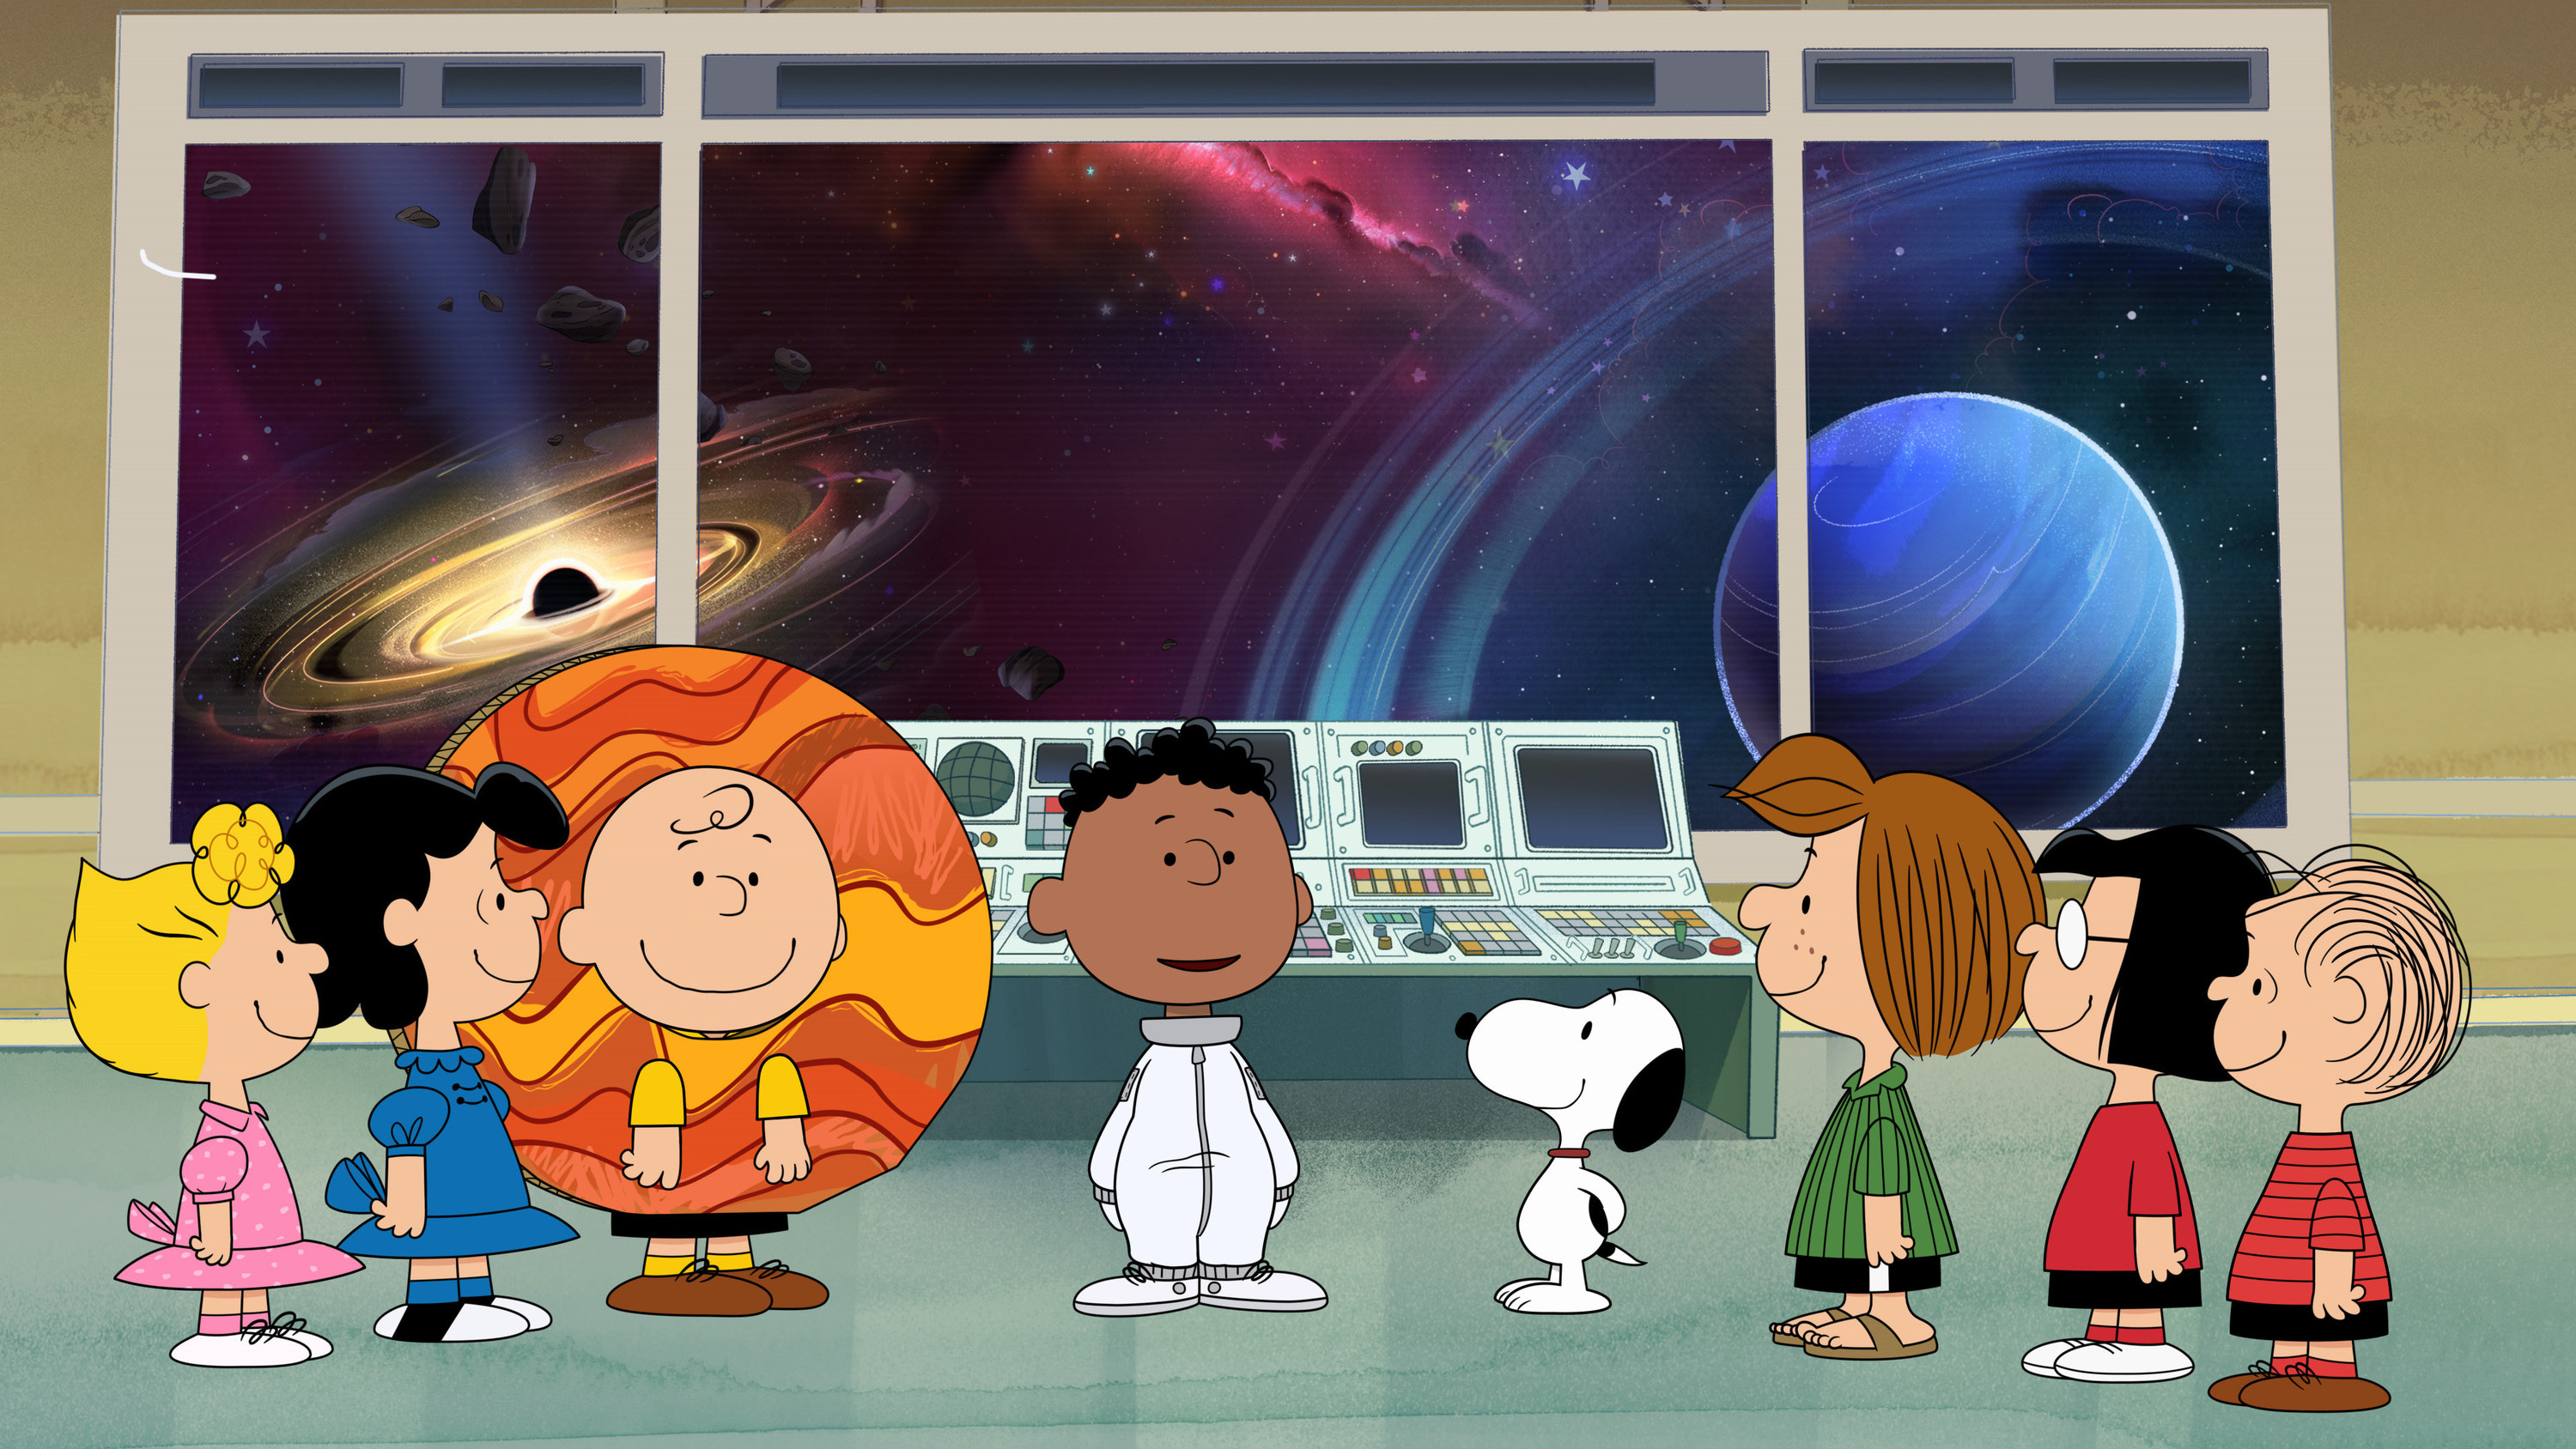 The Peanuts characters stand in a control room looking at planets